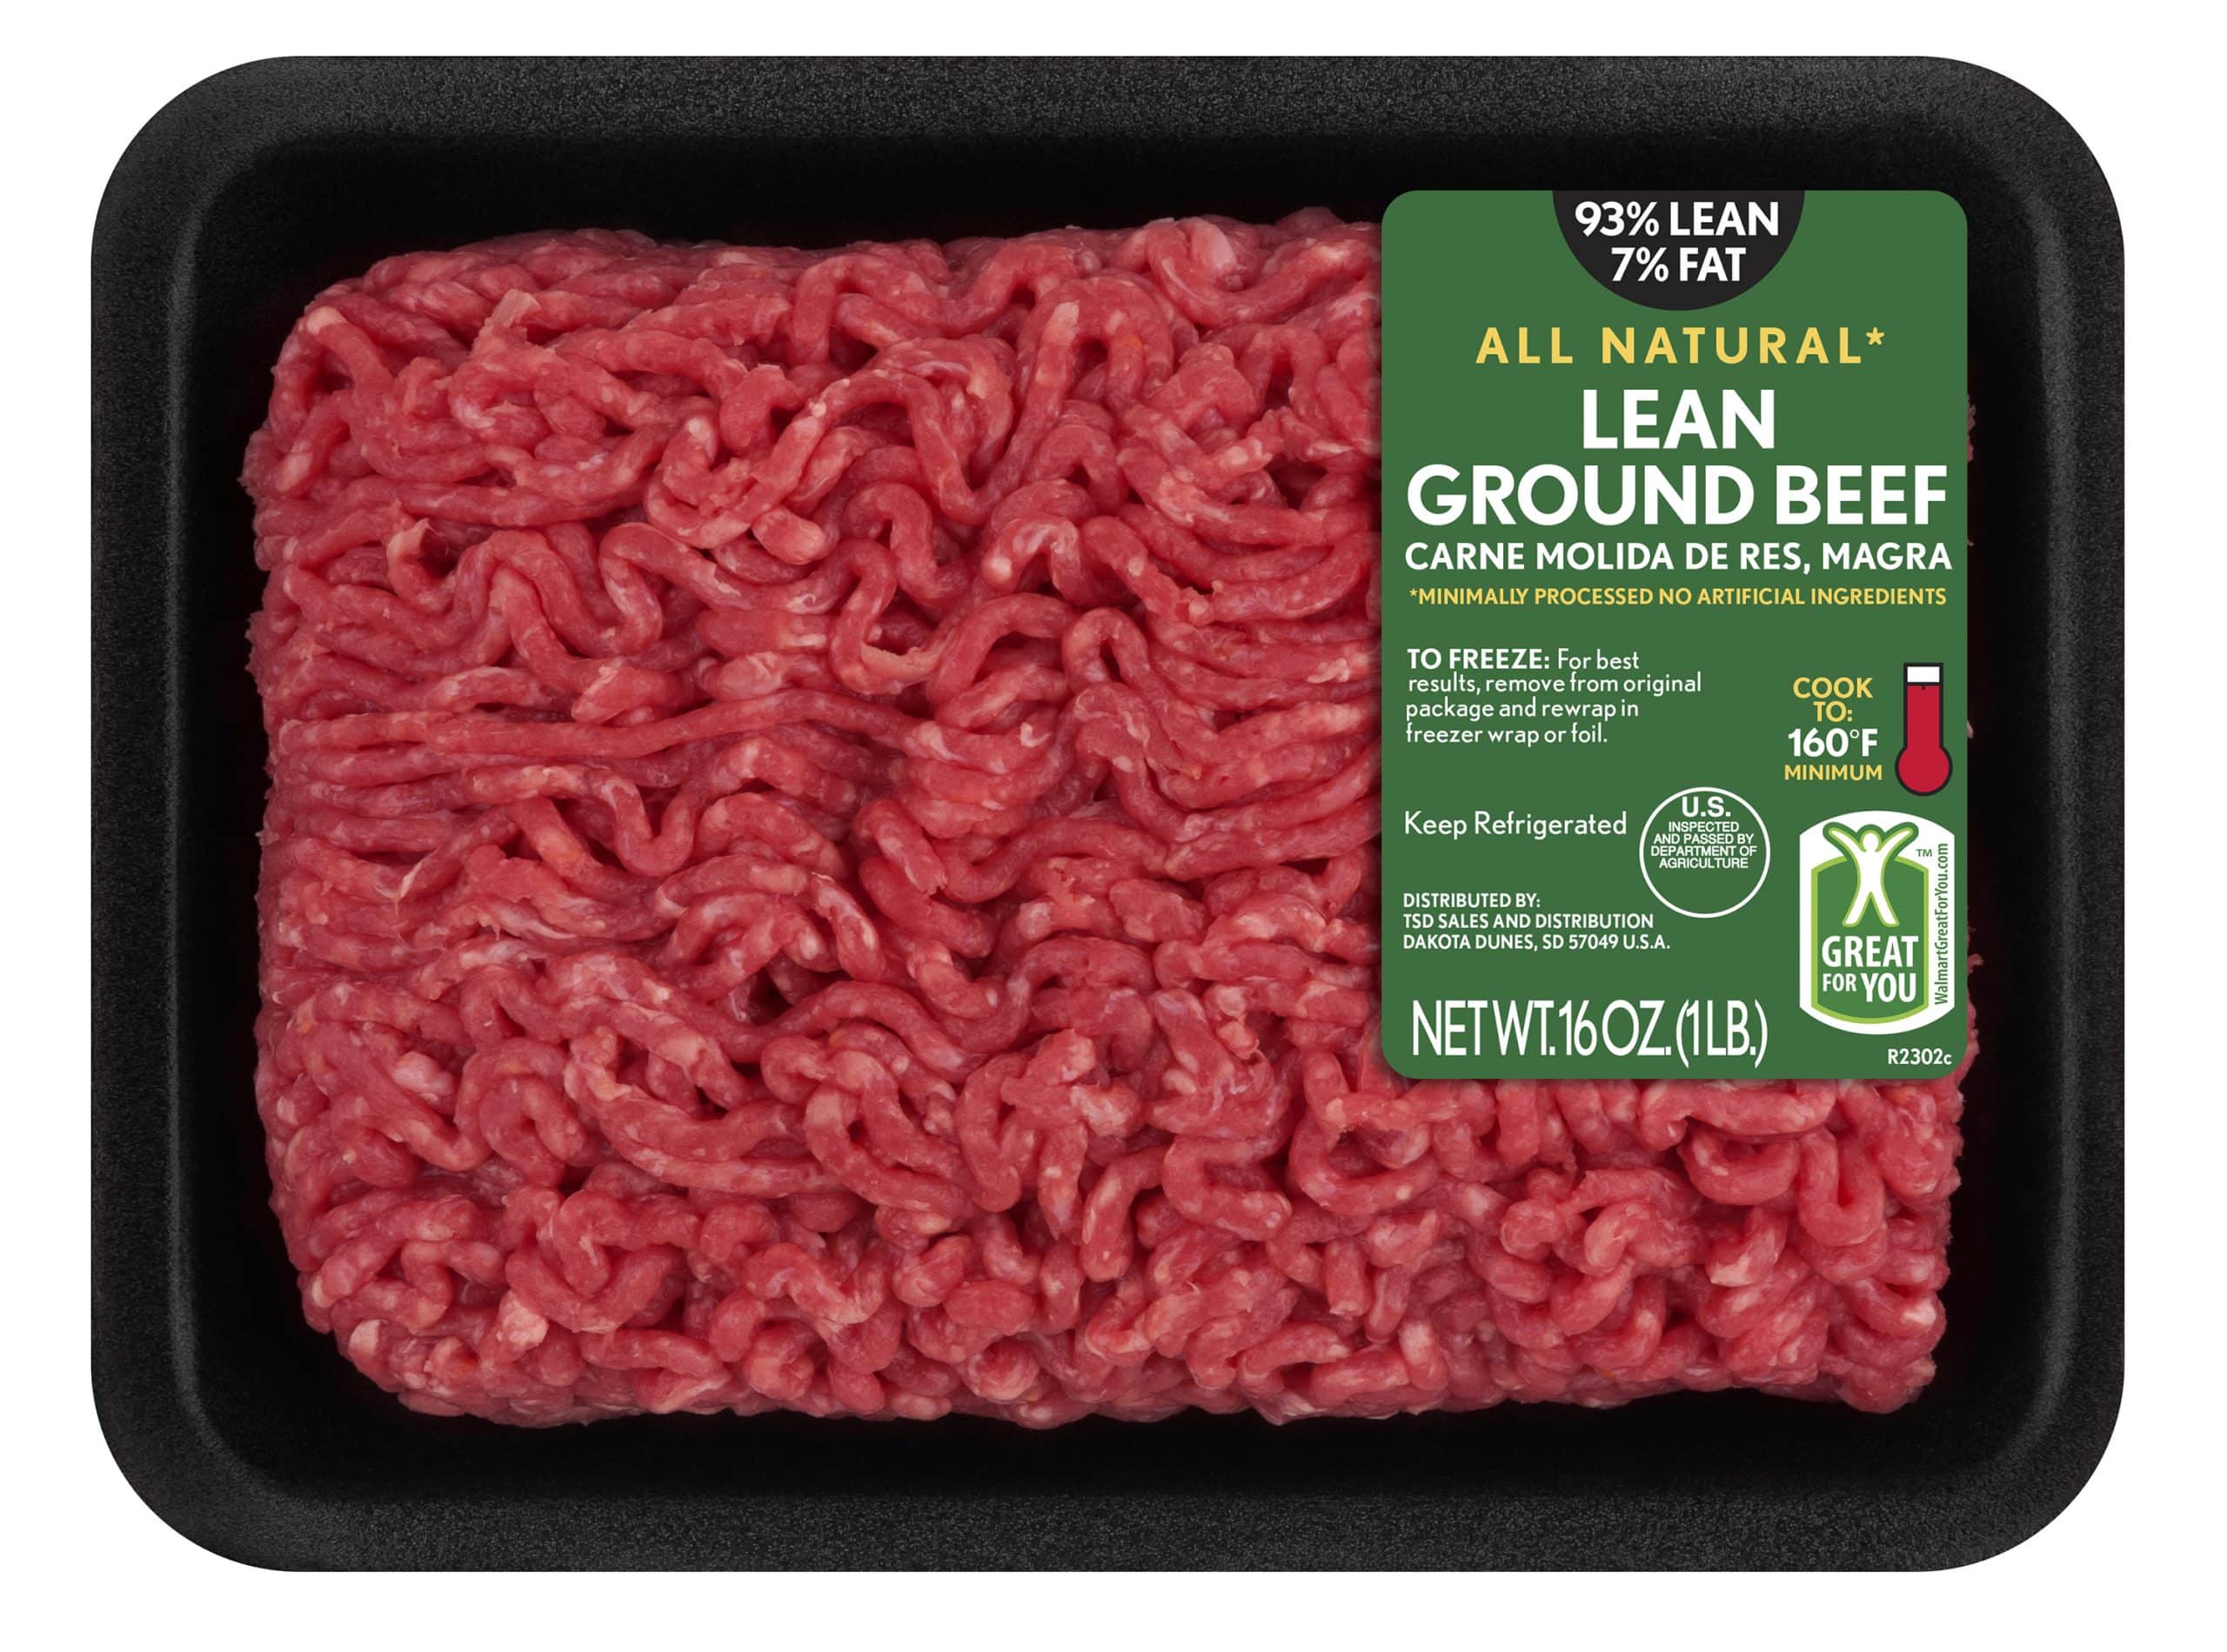 All Natural* 93% Lean/7% Fat Lean Ground Beef Tray, 1 lb From Walmart ...